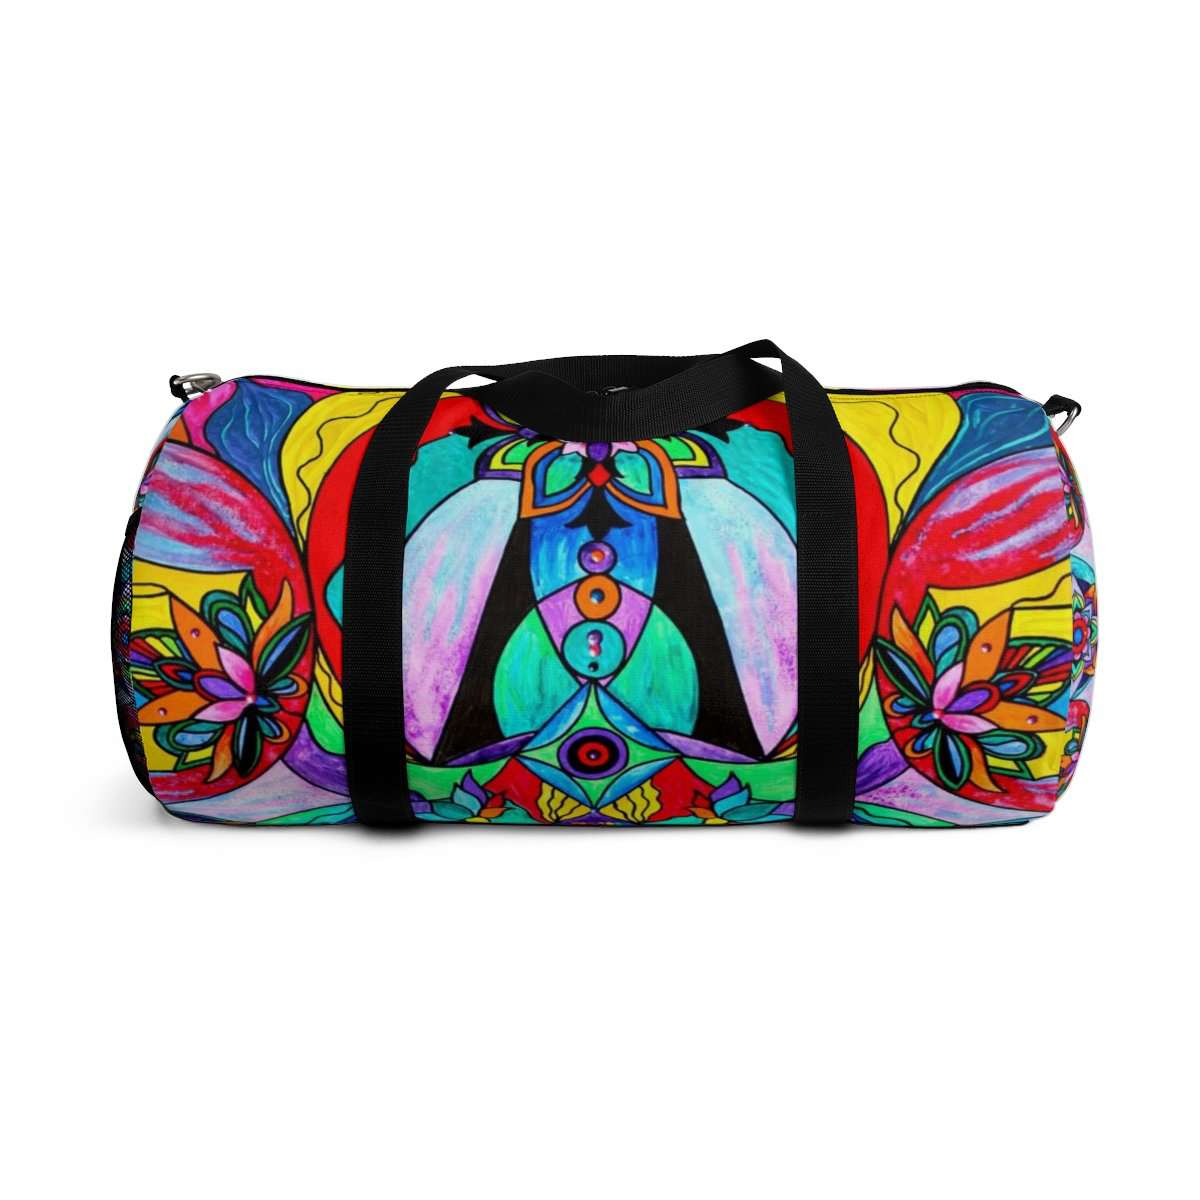 a-place-to-buy-receive-duffle-bag-online-now_9.jpg